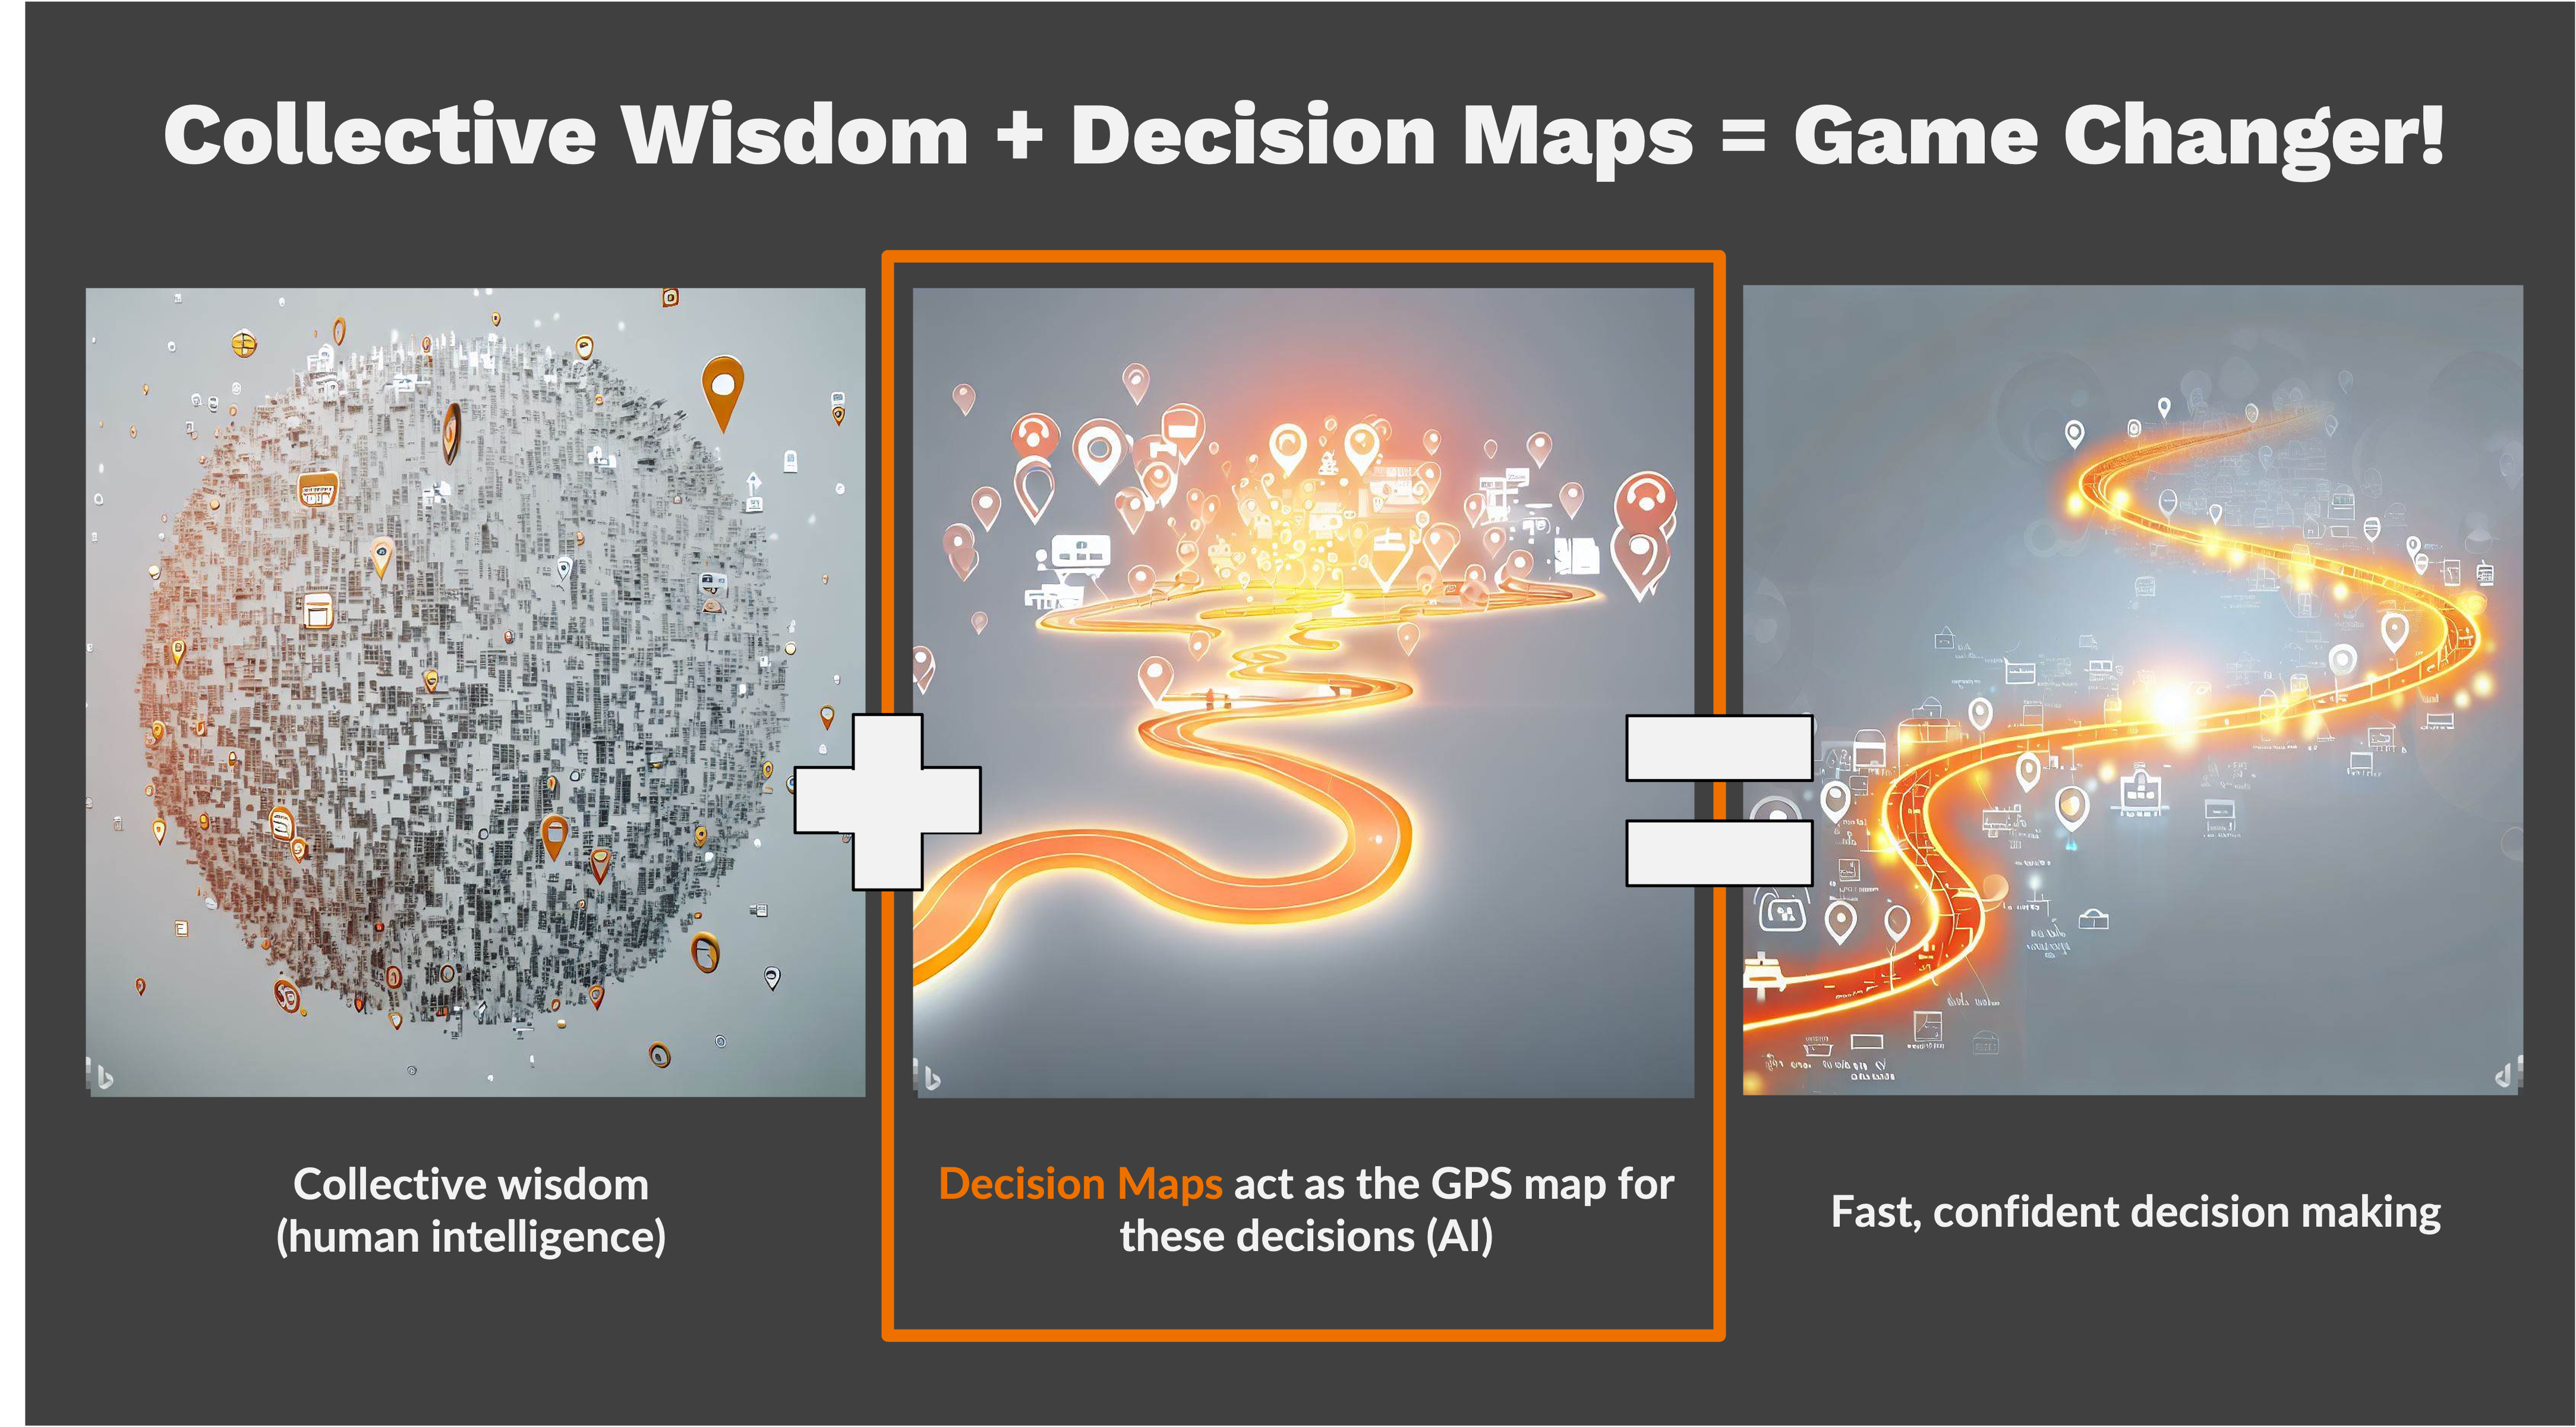 Illustration showing the combination of collective wisdom and Decision Maps leading to fast, confident decision making in cybersecurity procurement